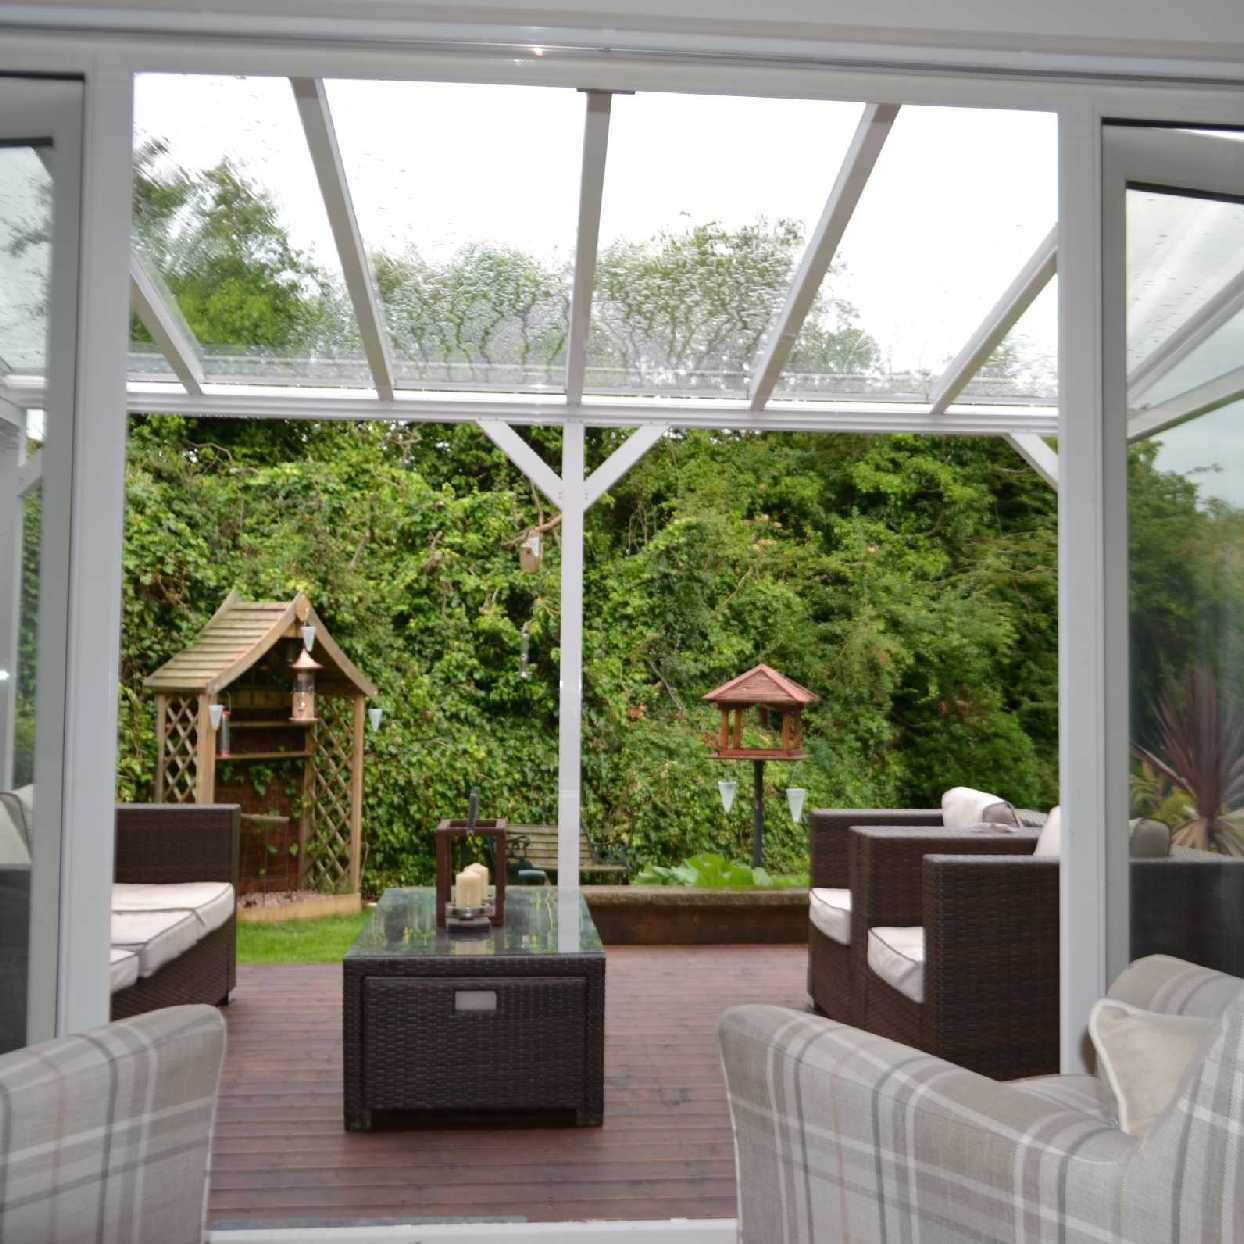 Great selection of Omega Smart Lean-To Canopy, White UNGLAZED for 6mm Glazing - 4.9m (W) x 2.0m (P), (3) Supporting Posts